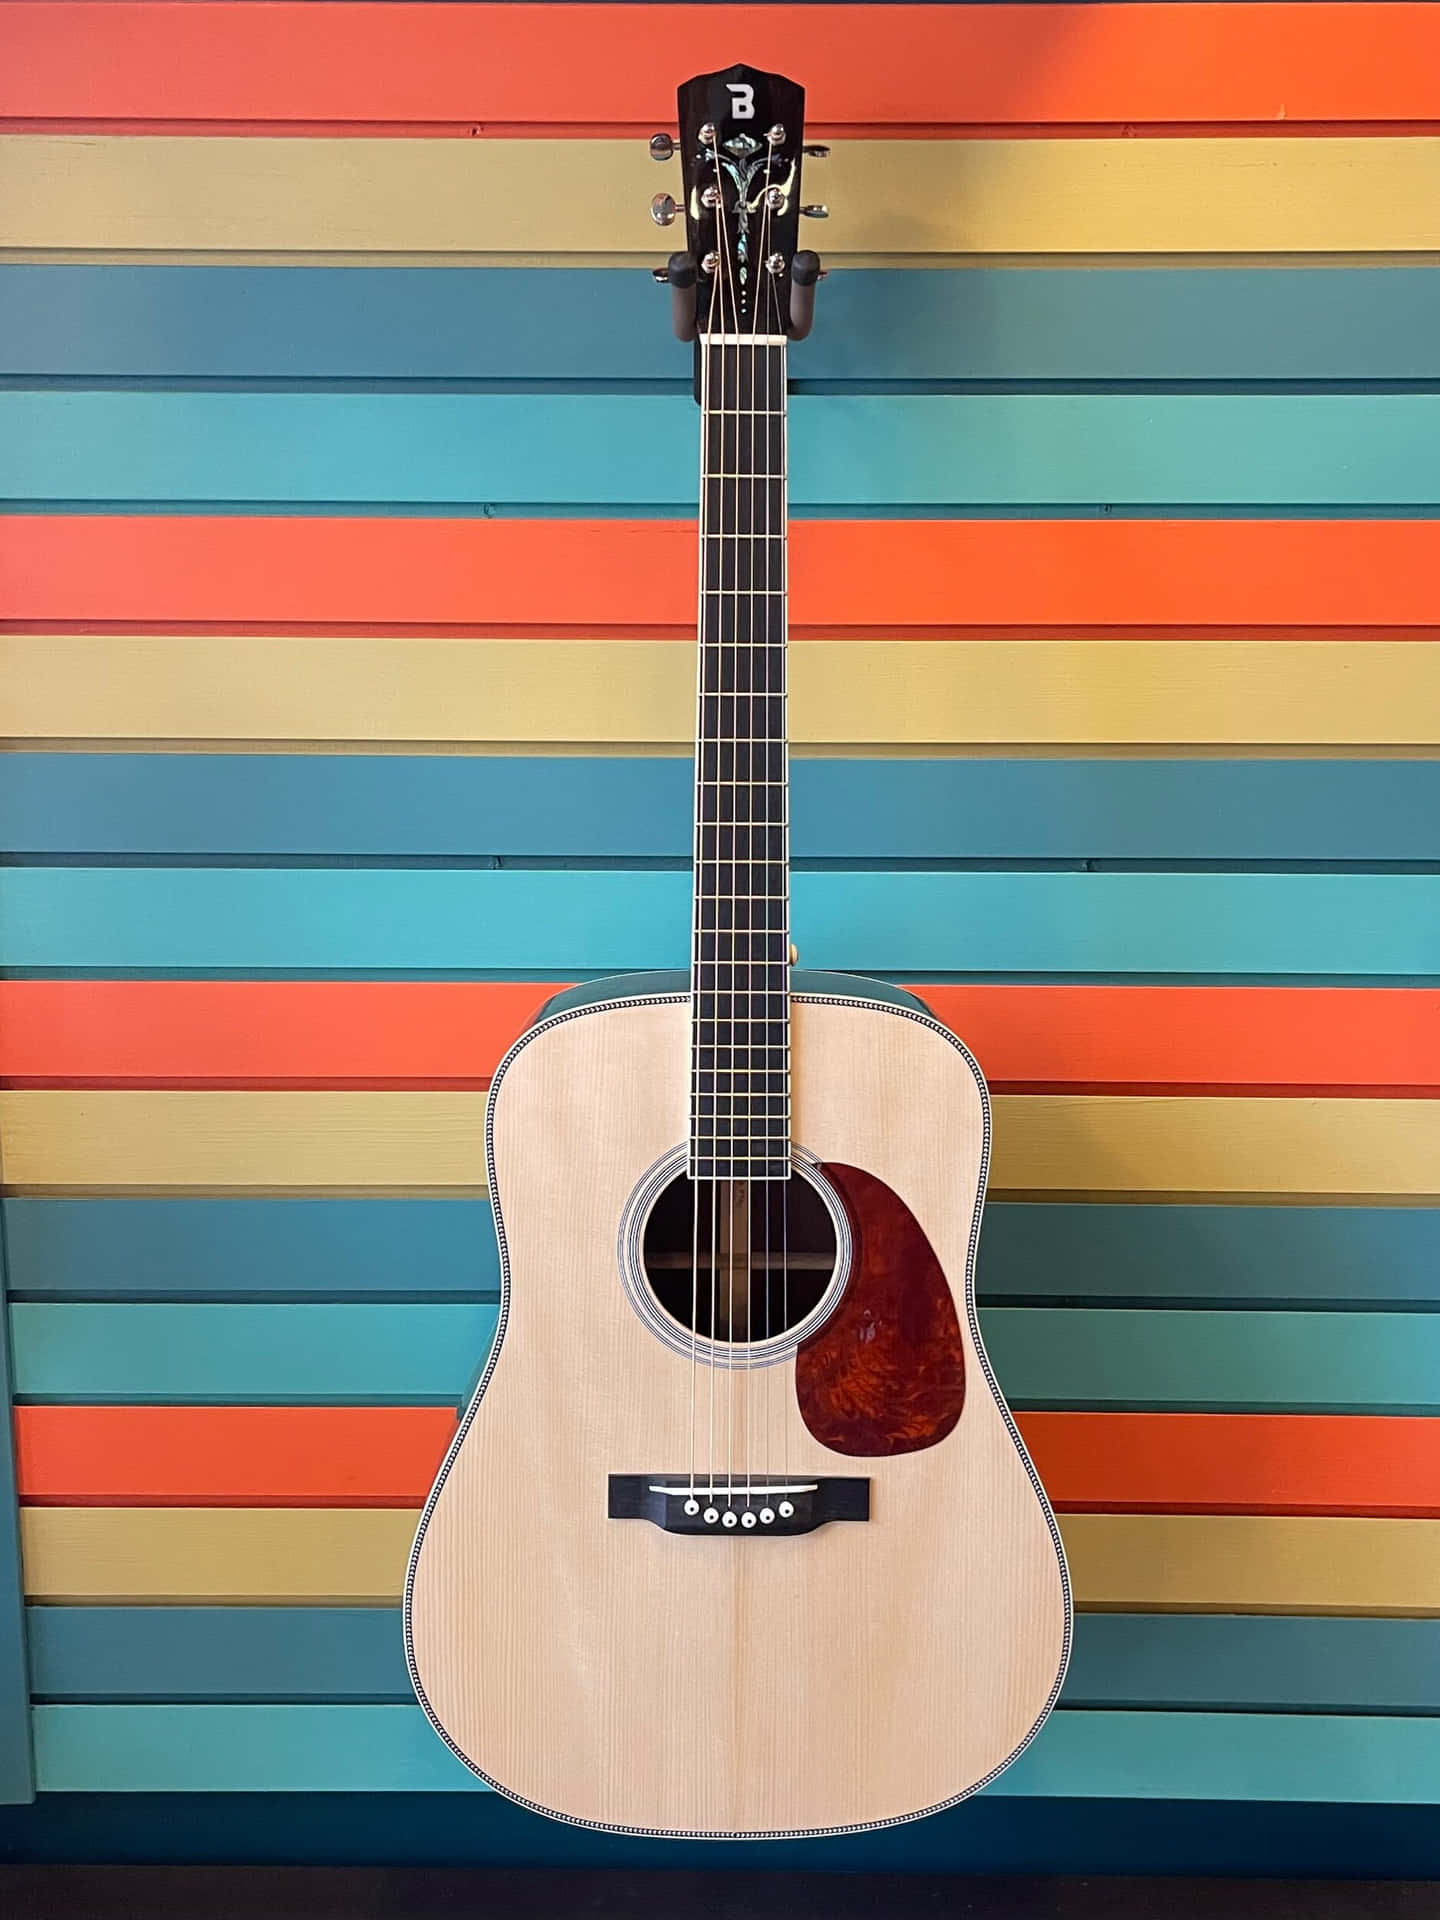 A Guitar Is Sitting Against A Colorful Wall